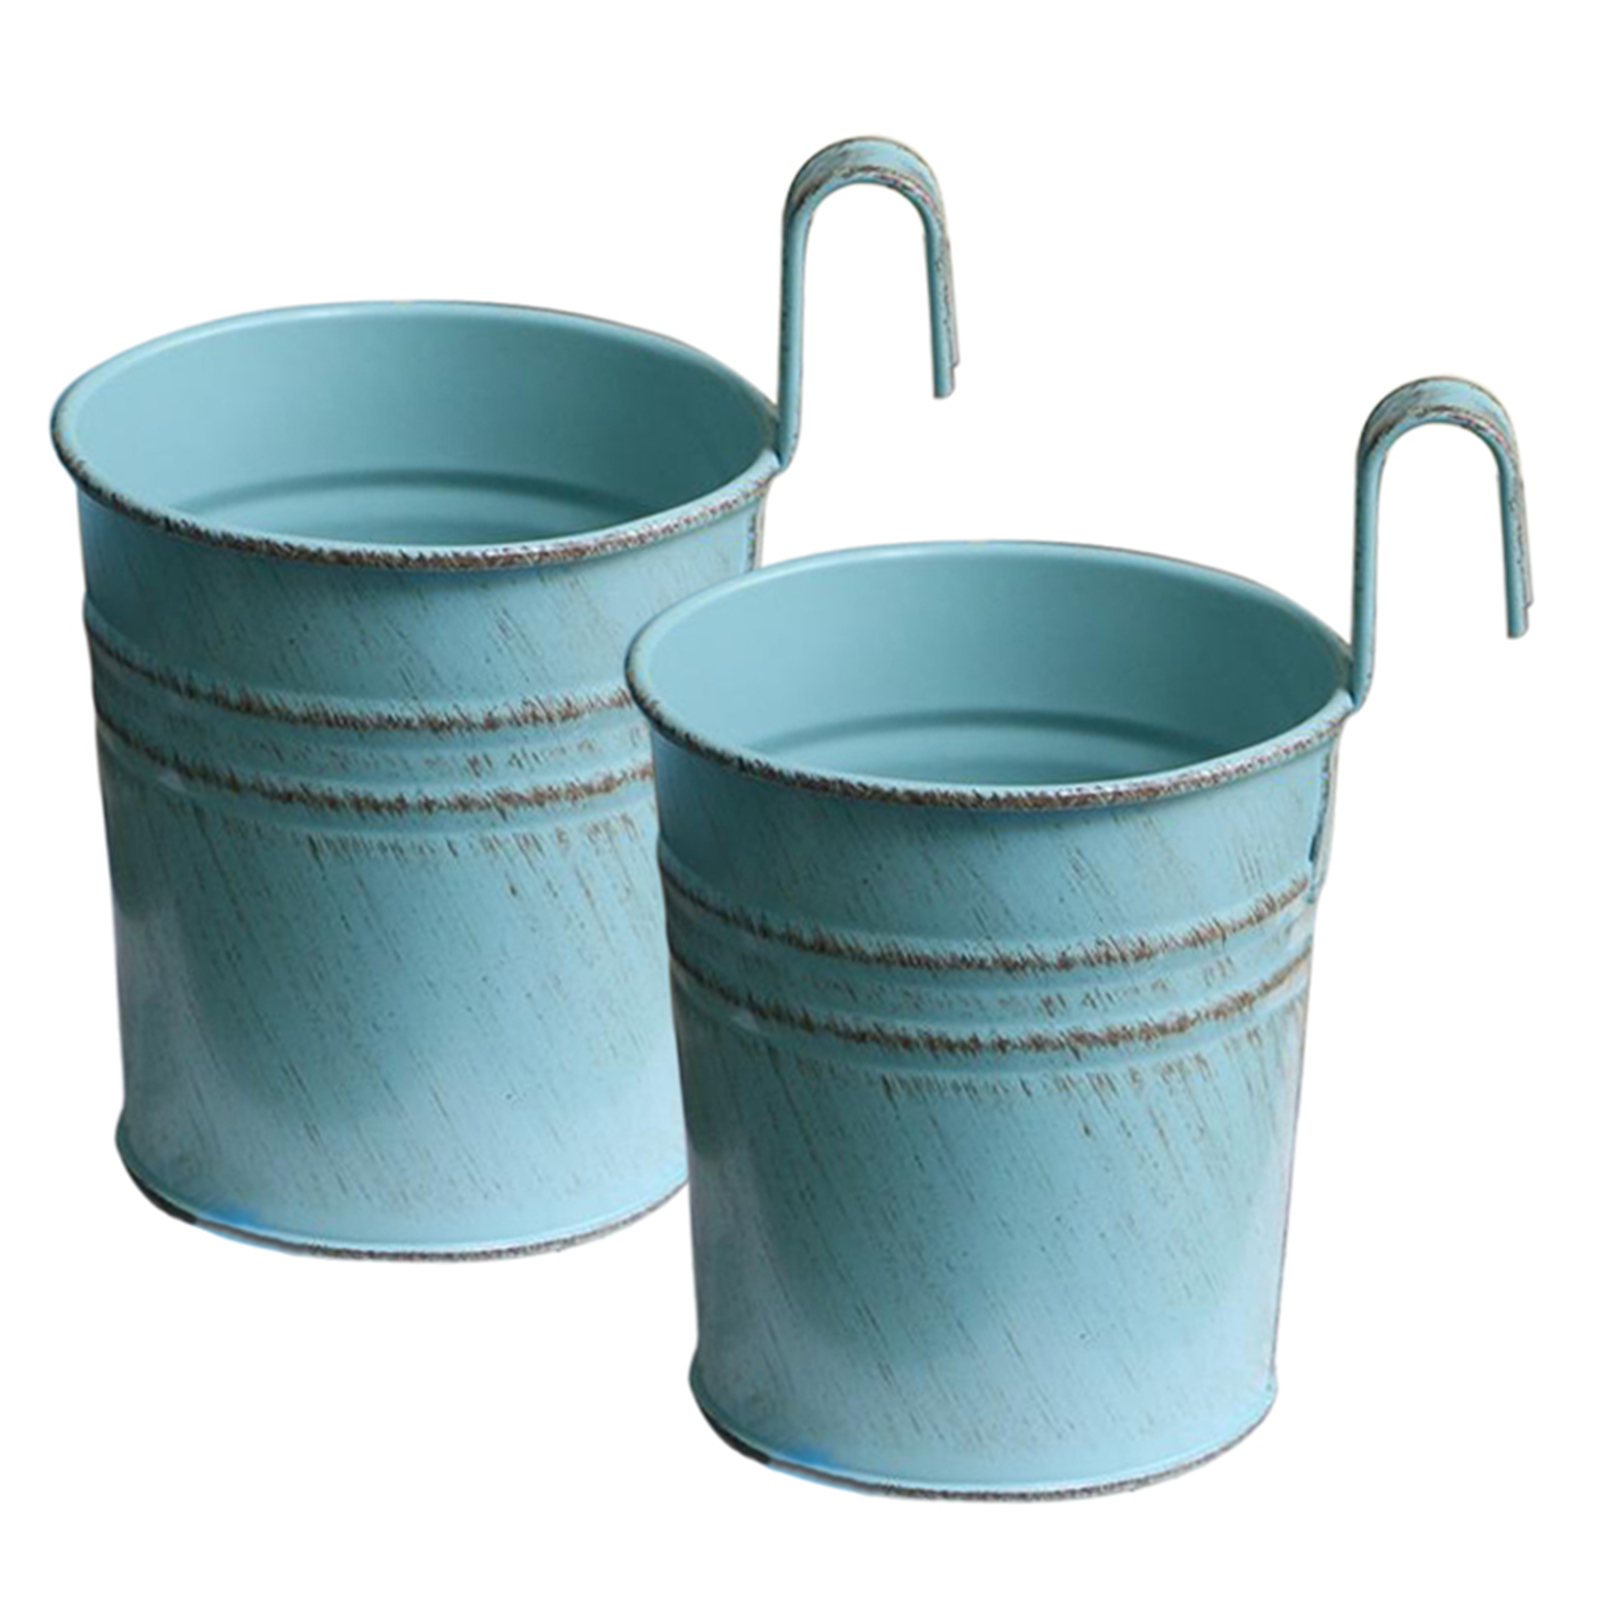 CreativeArrowy Plant Pot Flower Stand Durable 2Pcs Metal Uv Protection Ceramic Planters Detachable Colorful Lightweight Bucket Planter - image 1 of 14